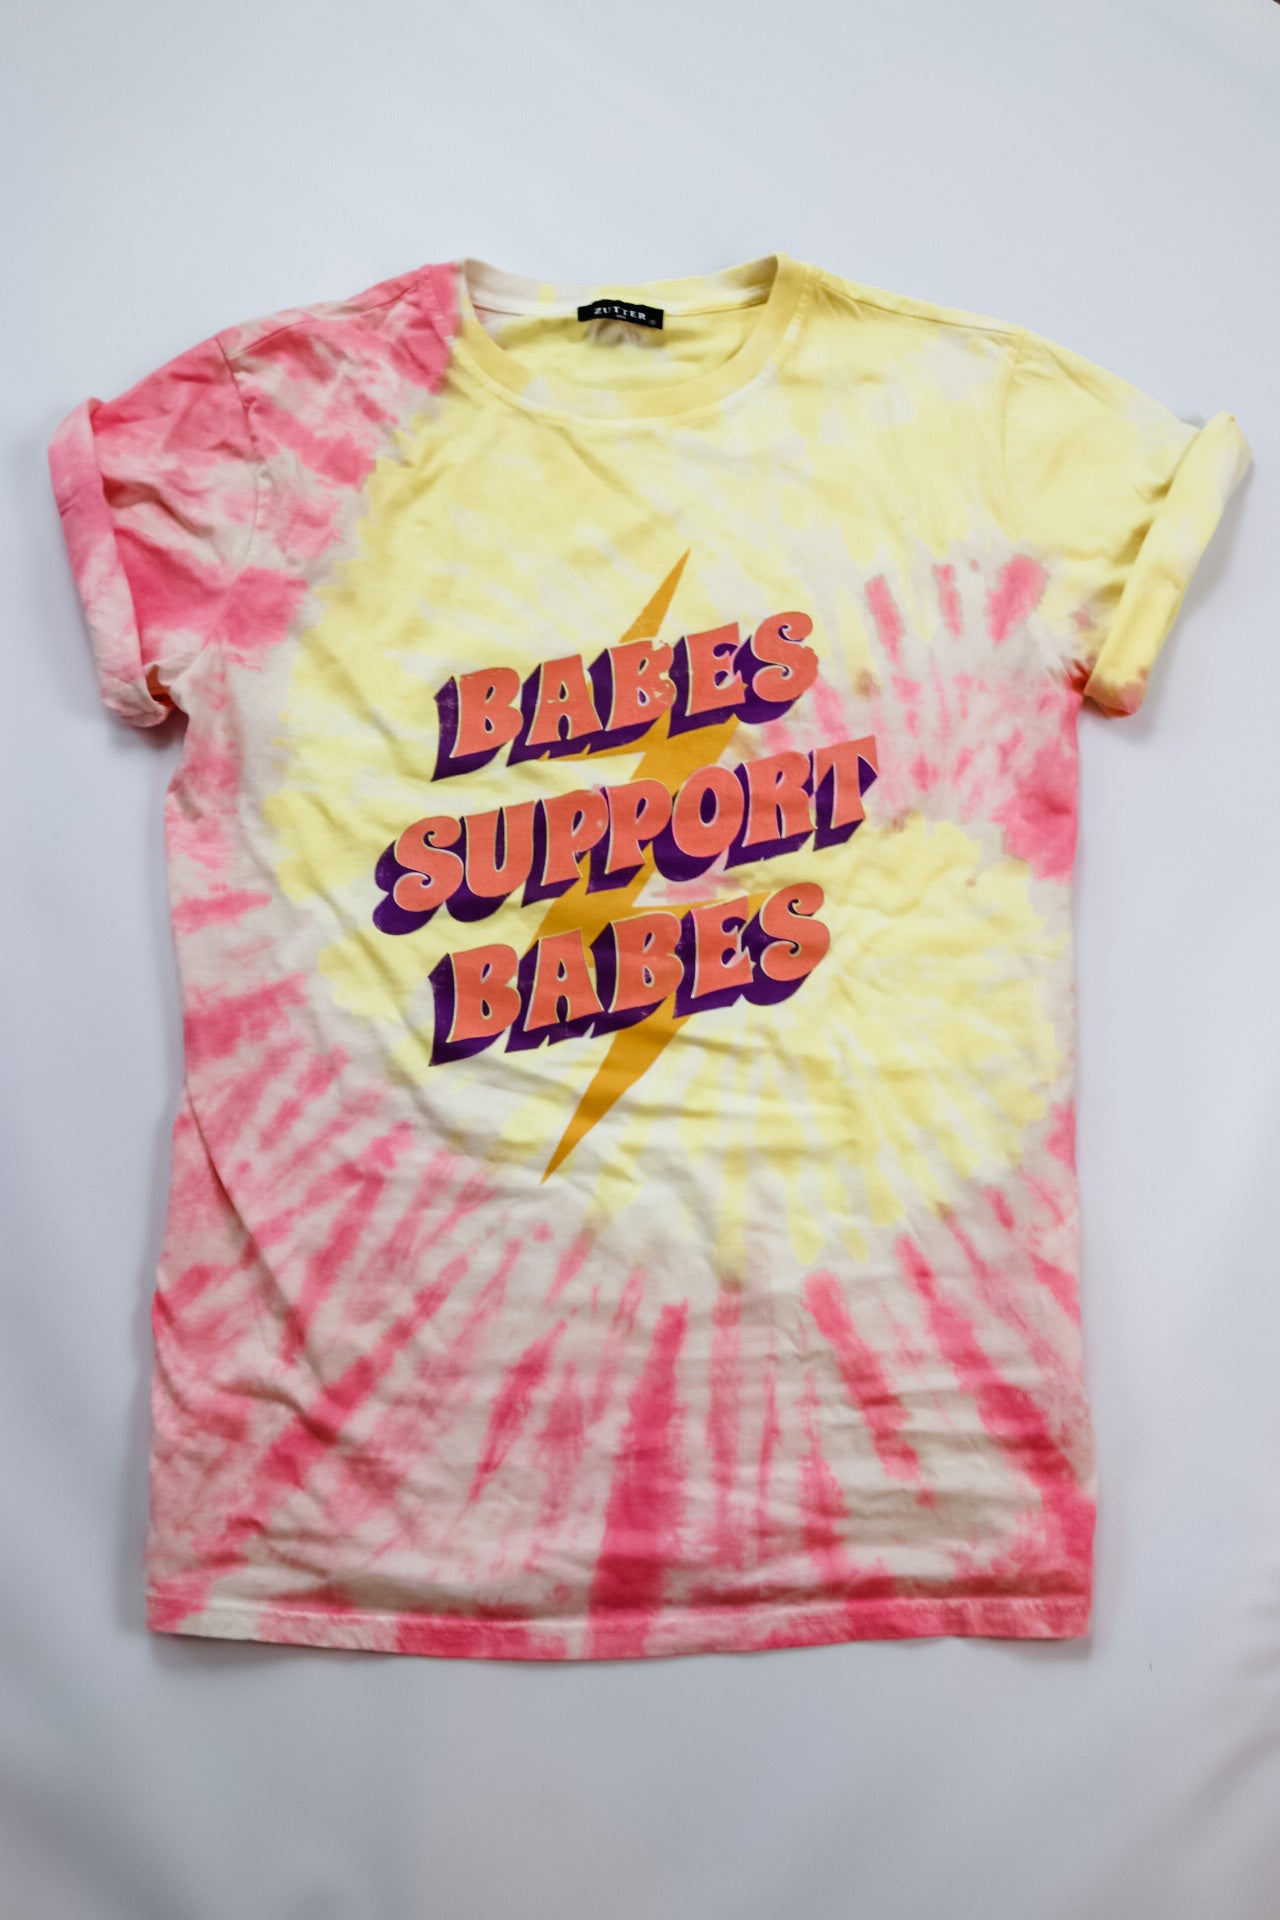 Babes Support Babes Tie Dye Tee - Renegade Revival